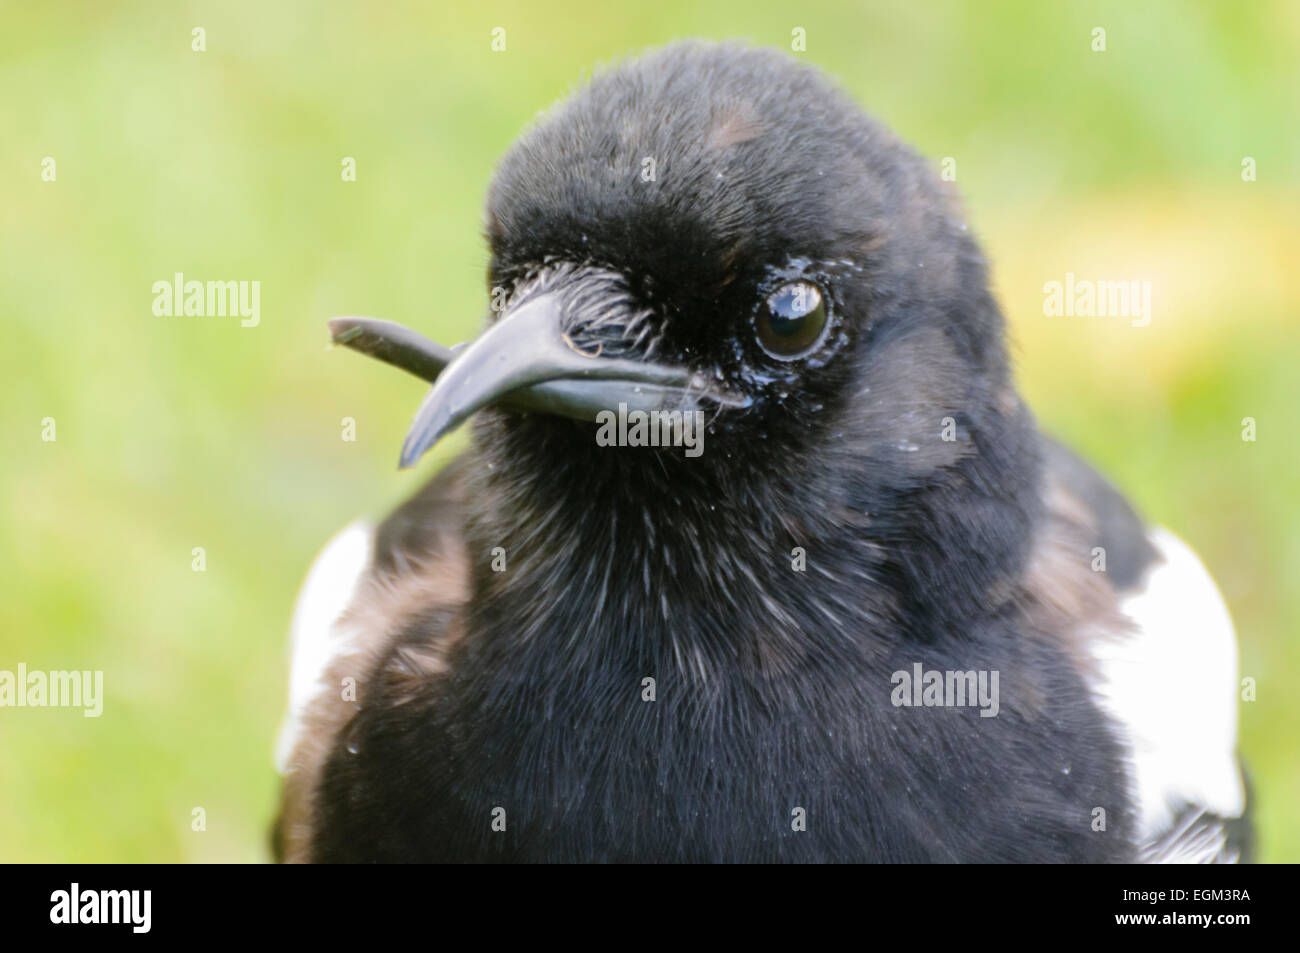 A wild magpie with a deformed beak.  This bird is tame as it relies on people for food as otherwise it would not survive in the wild. Stock Photo